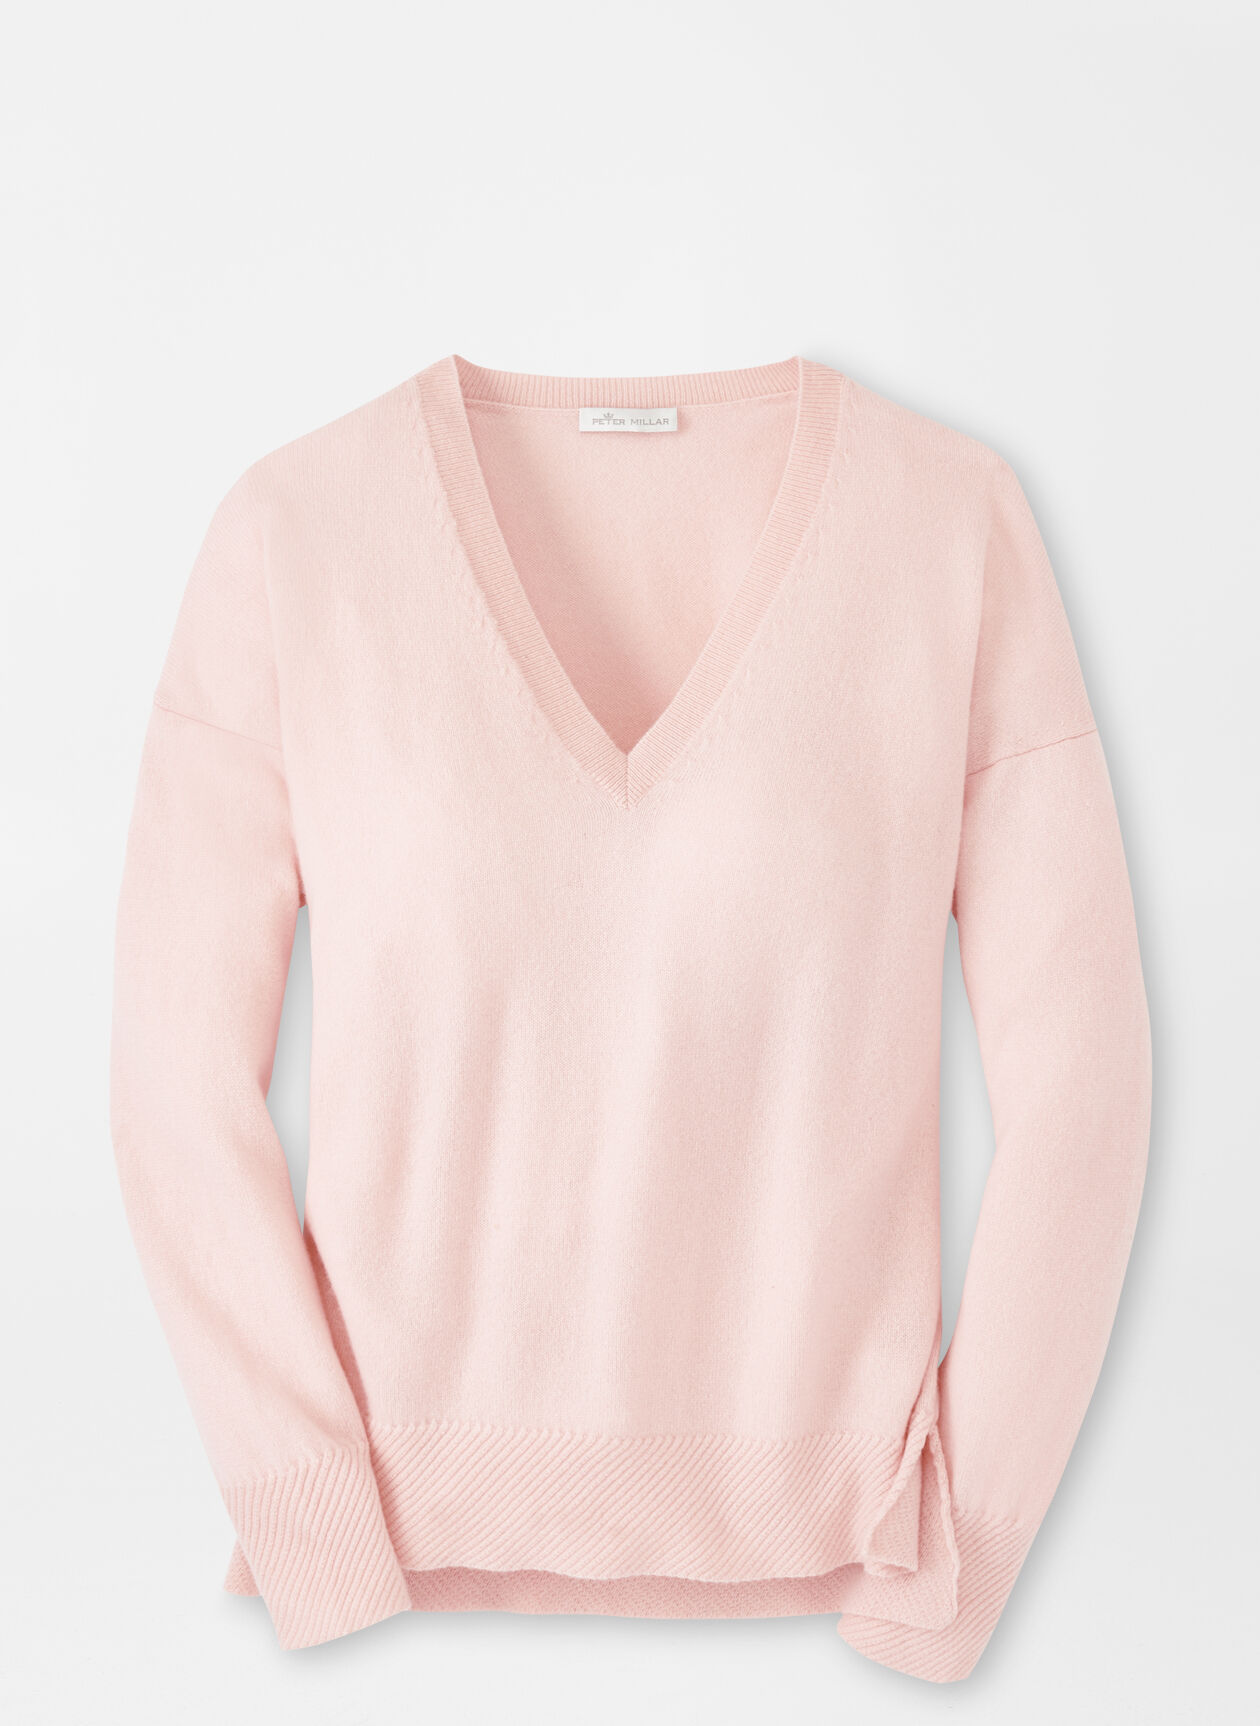 Women's Artisan Crafted Cashmere Sweater | Women's Tops | Peter 